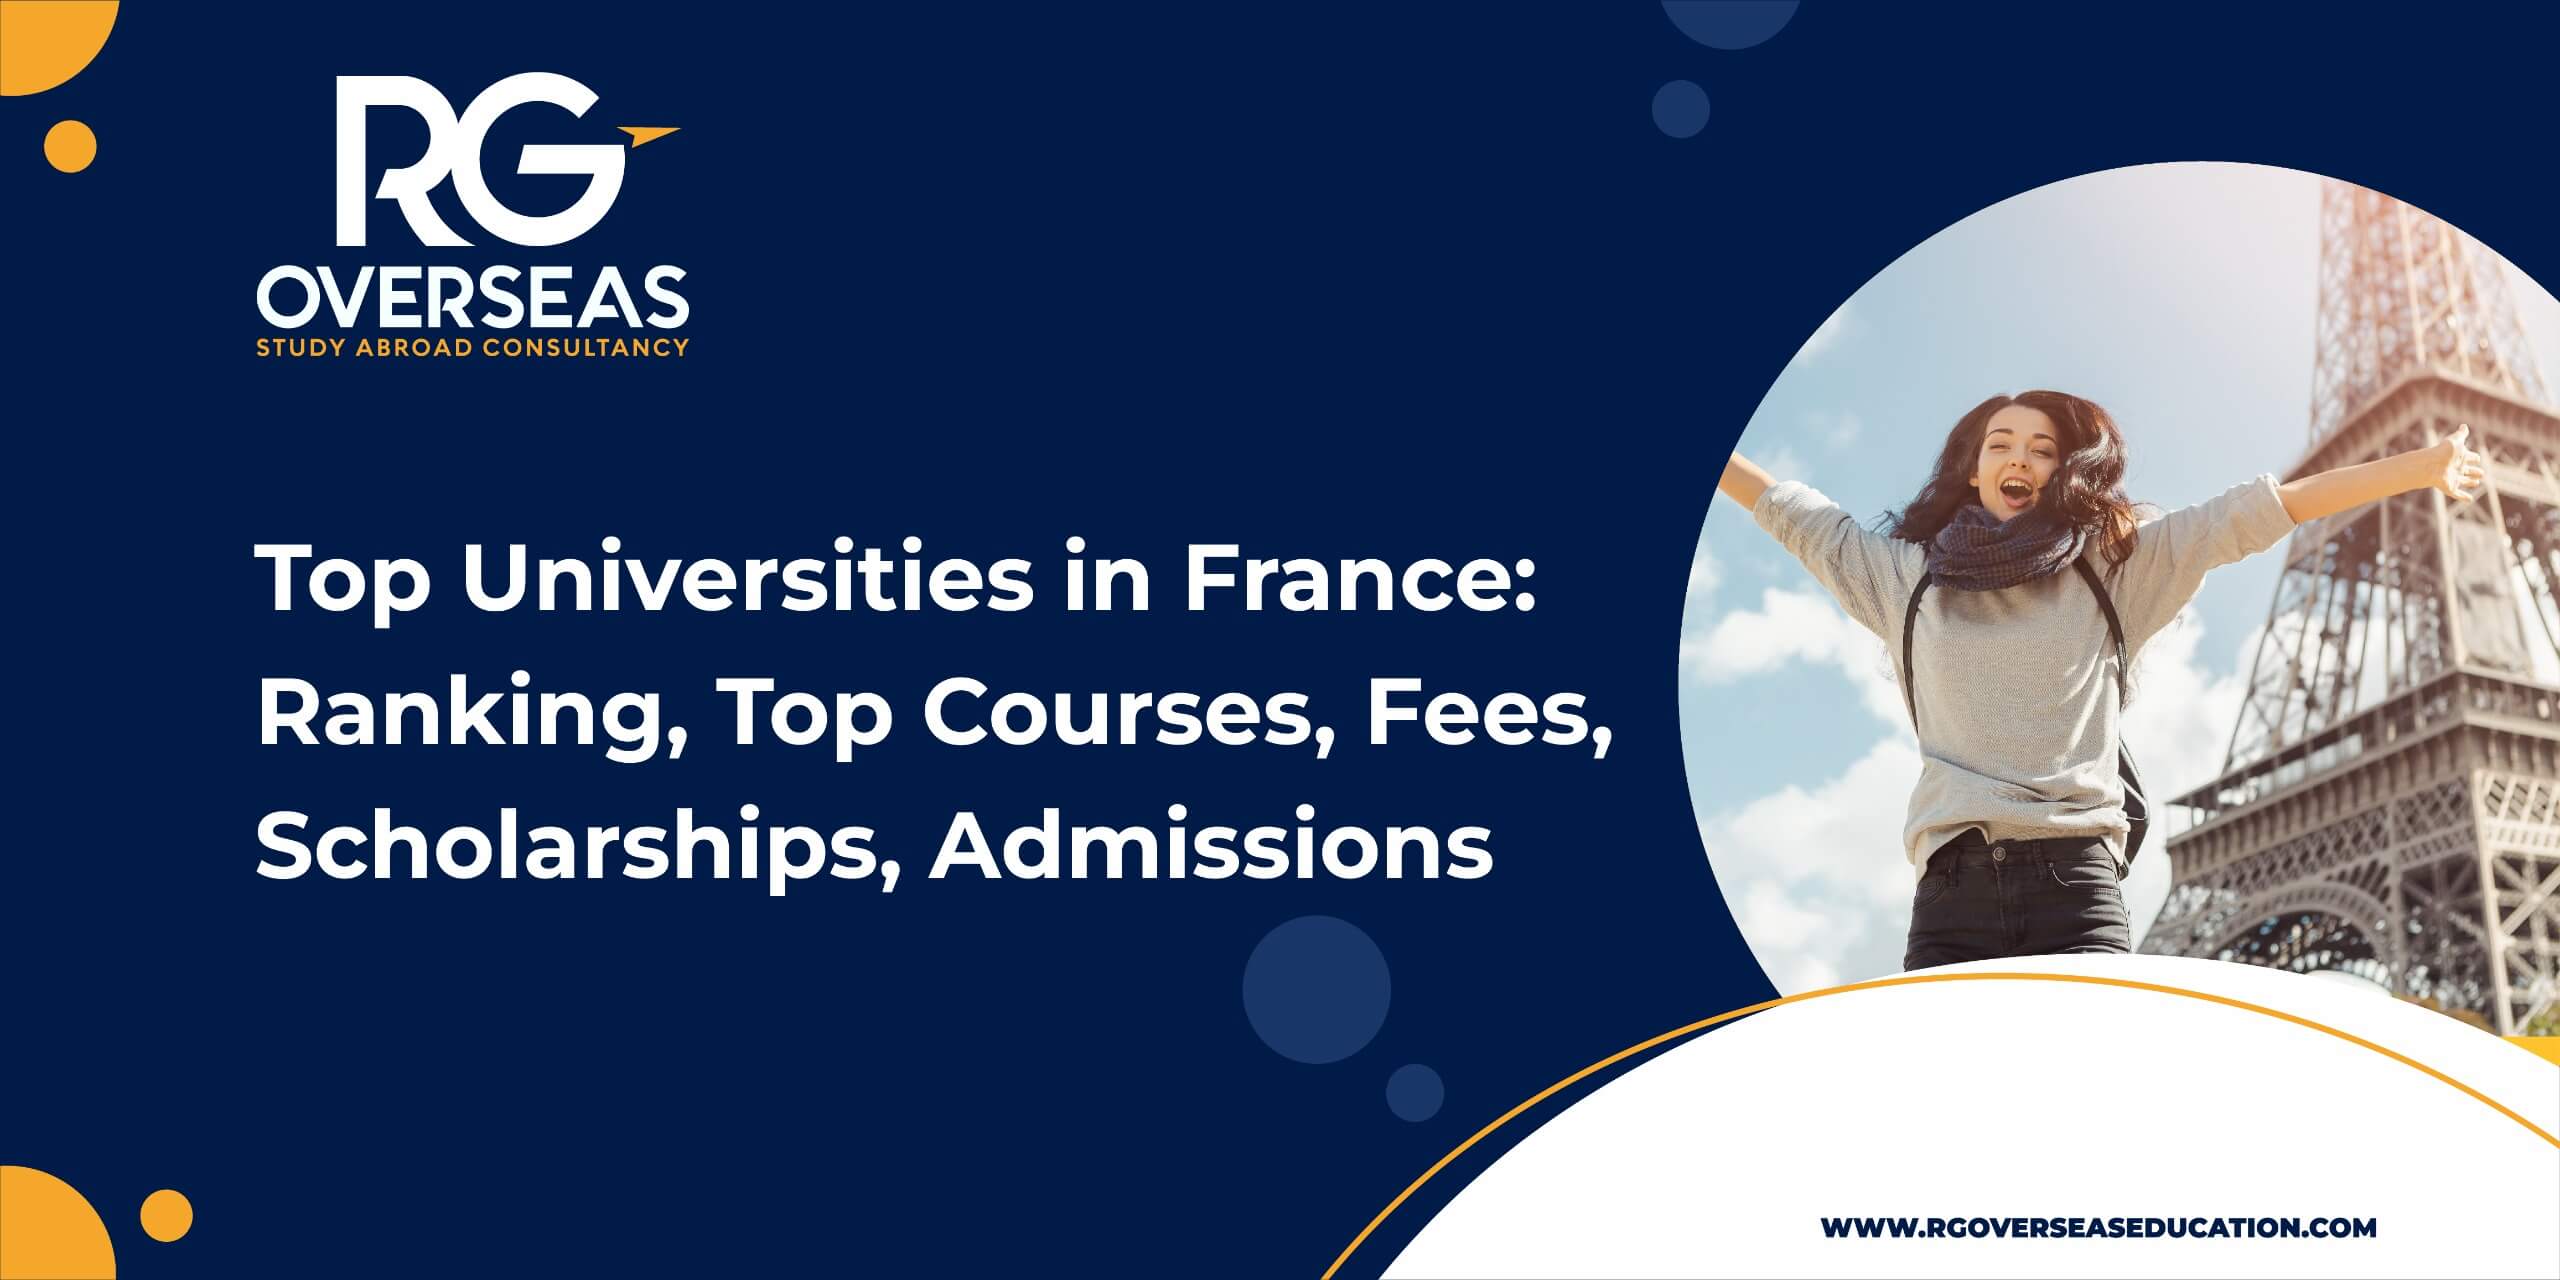 Top Universities in France: Ranking, Top Courses, Fees, Scholarships, Admissions